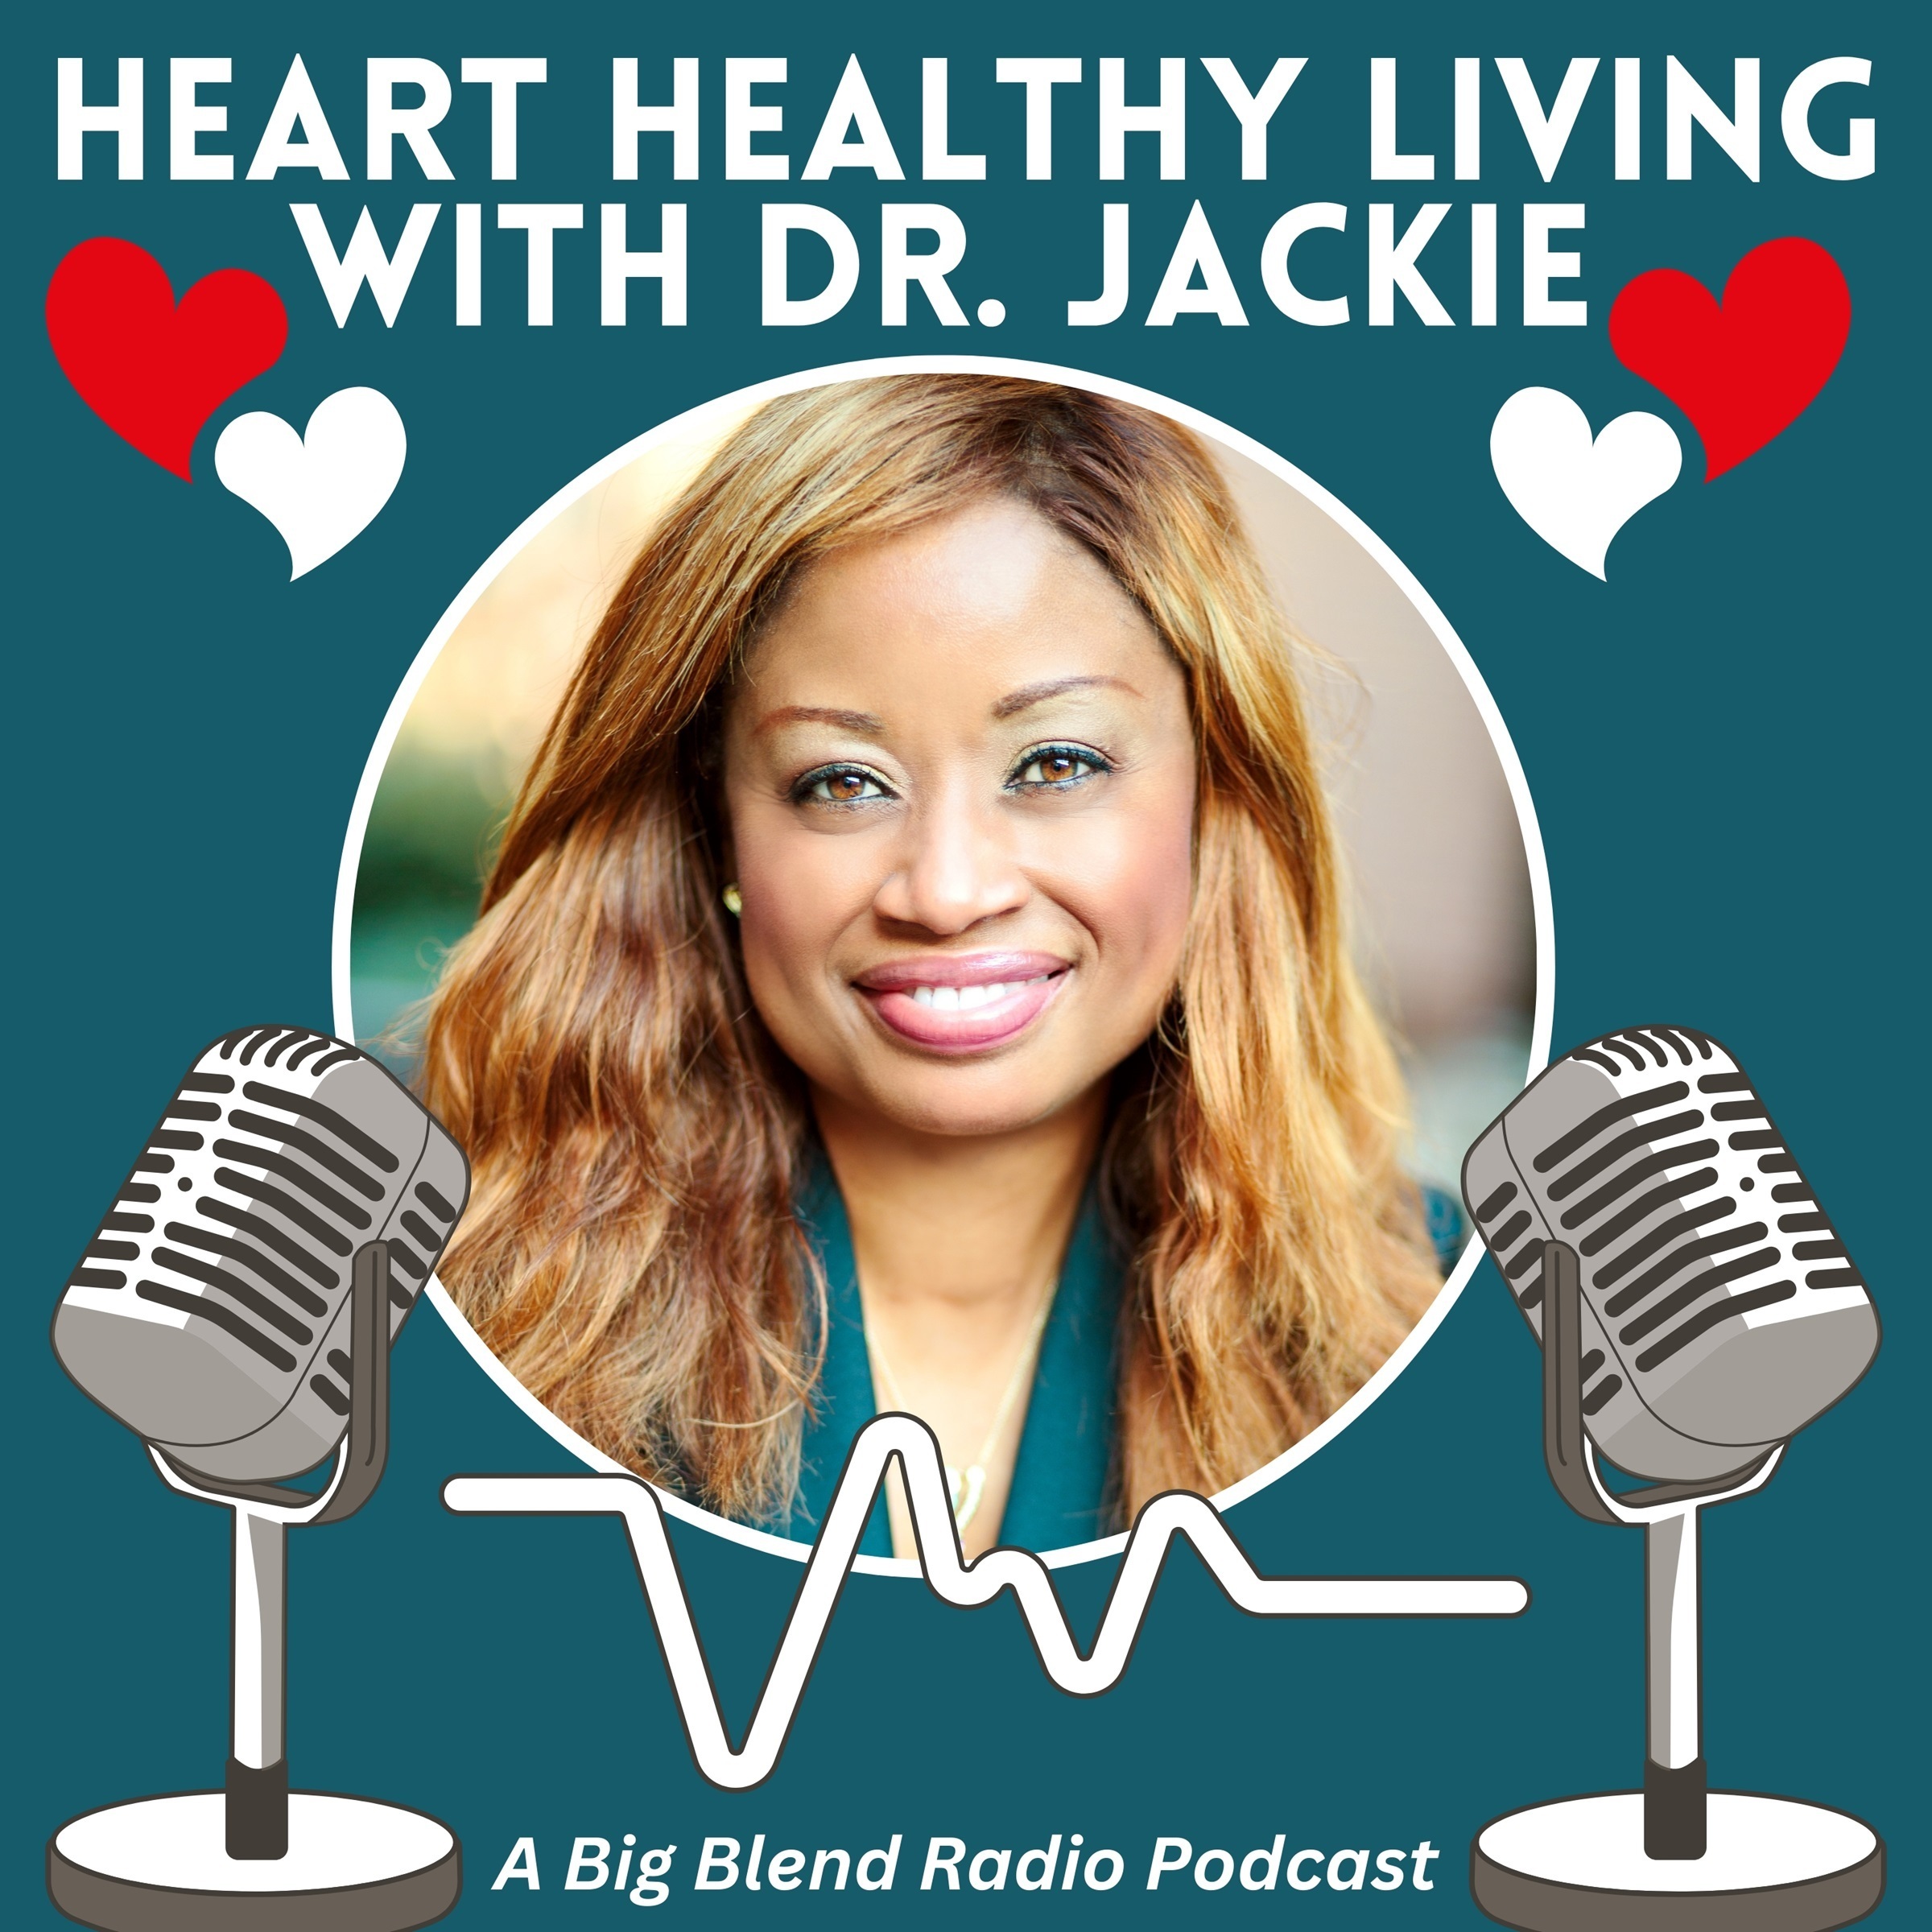 Heart Healthy Living with Dr. Jackie